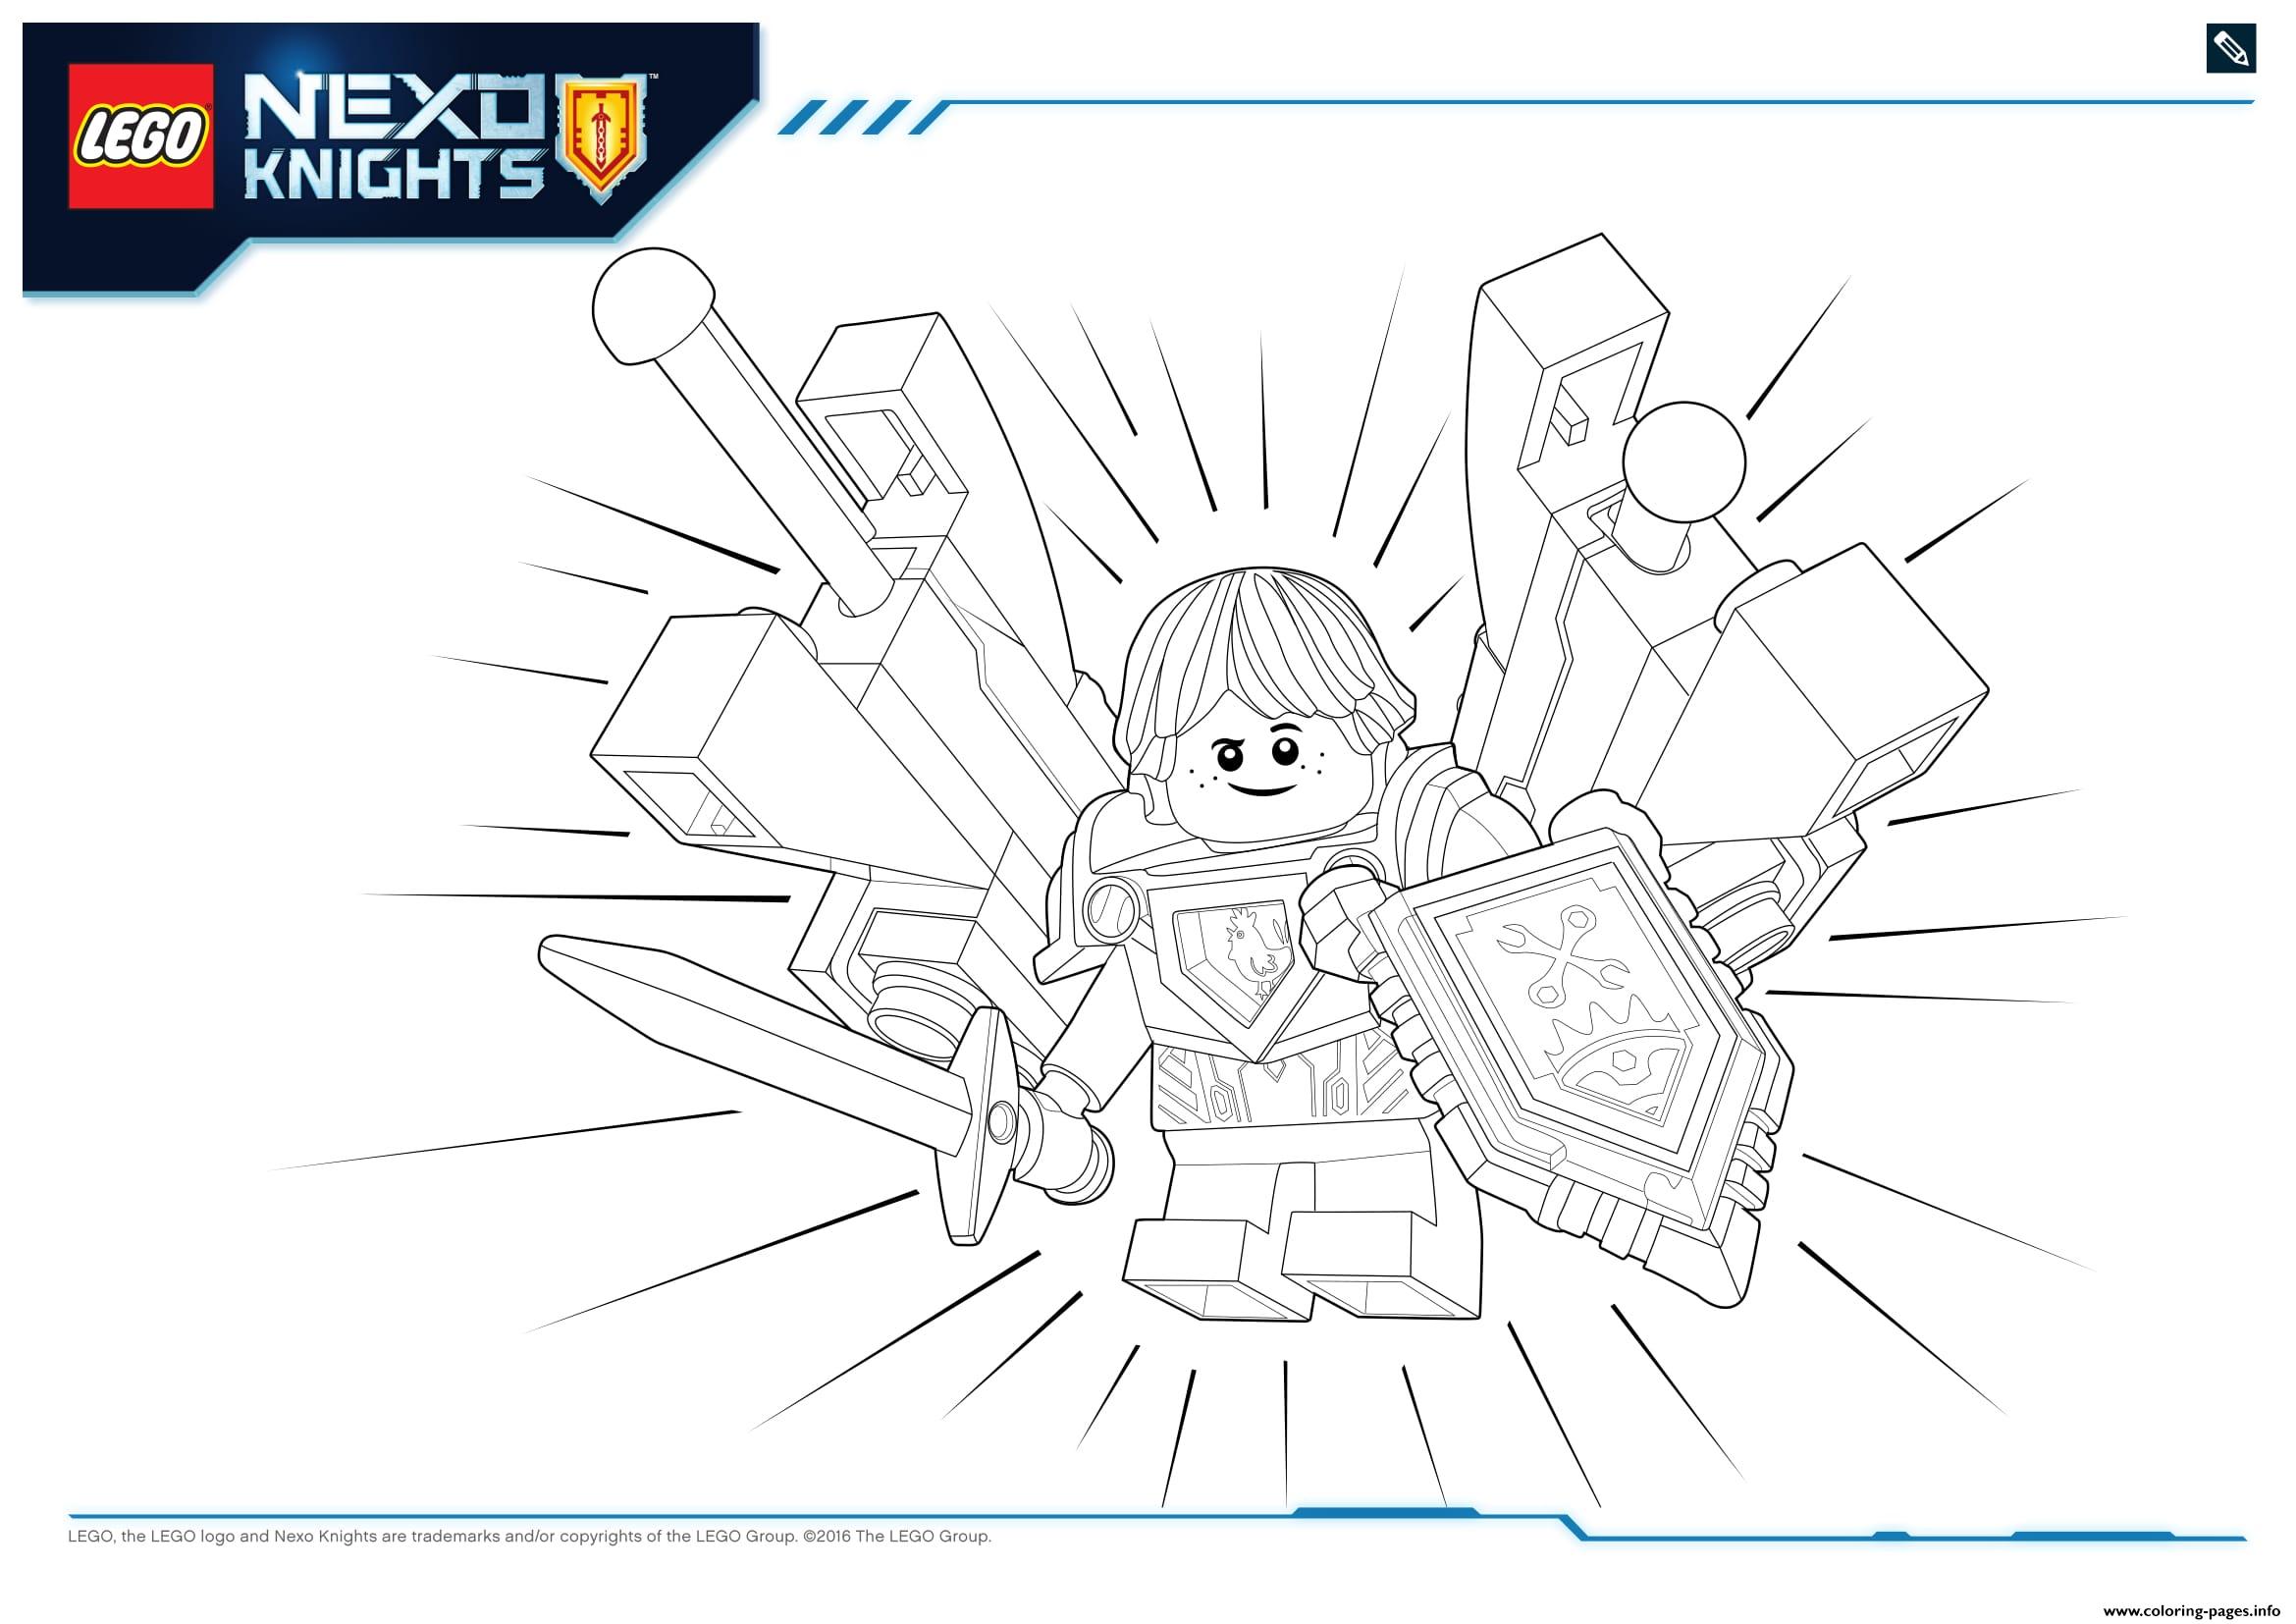 Lego Nexo Knights Ultimate Knights 4 coloring